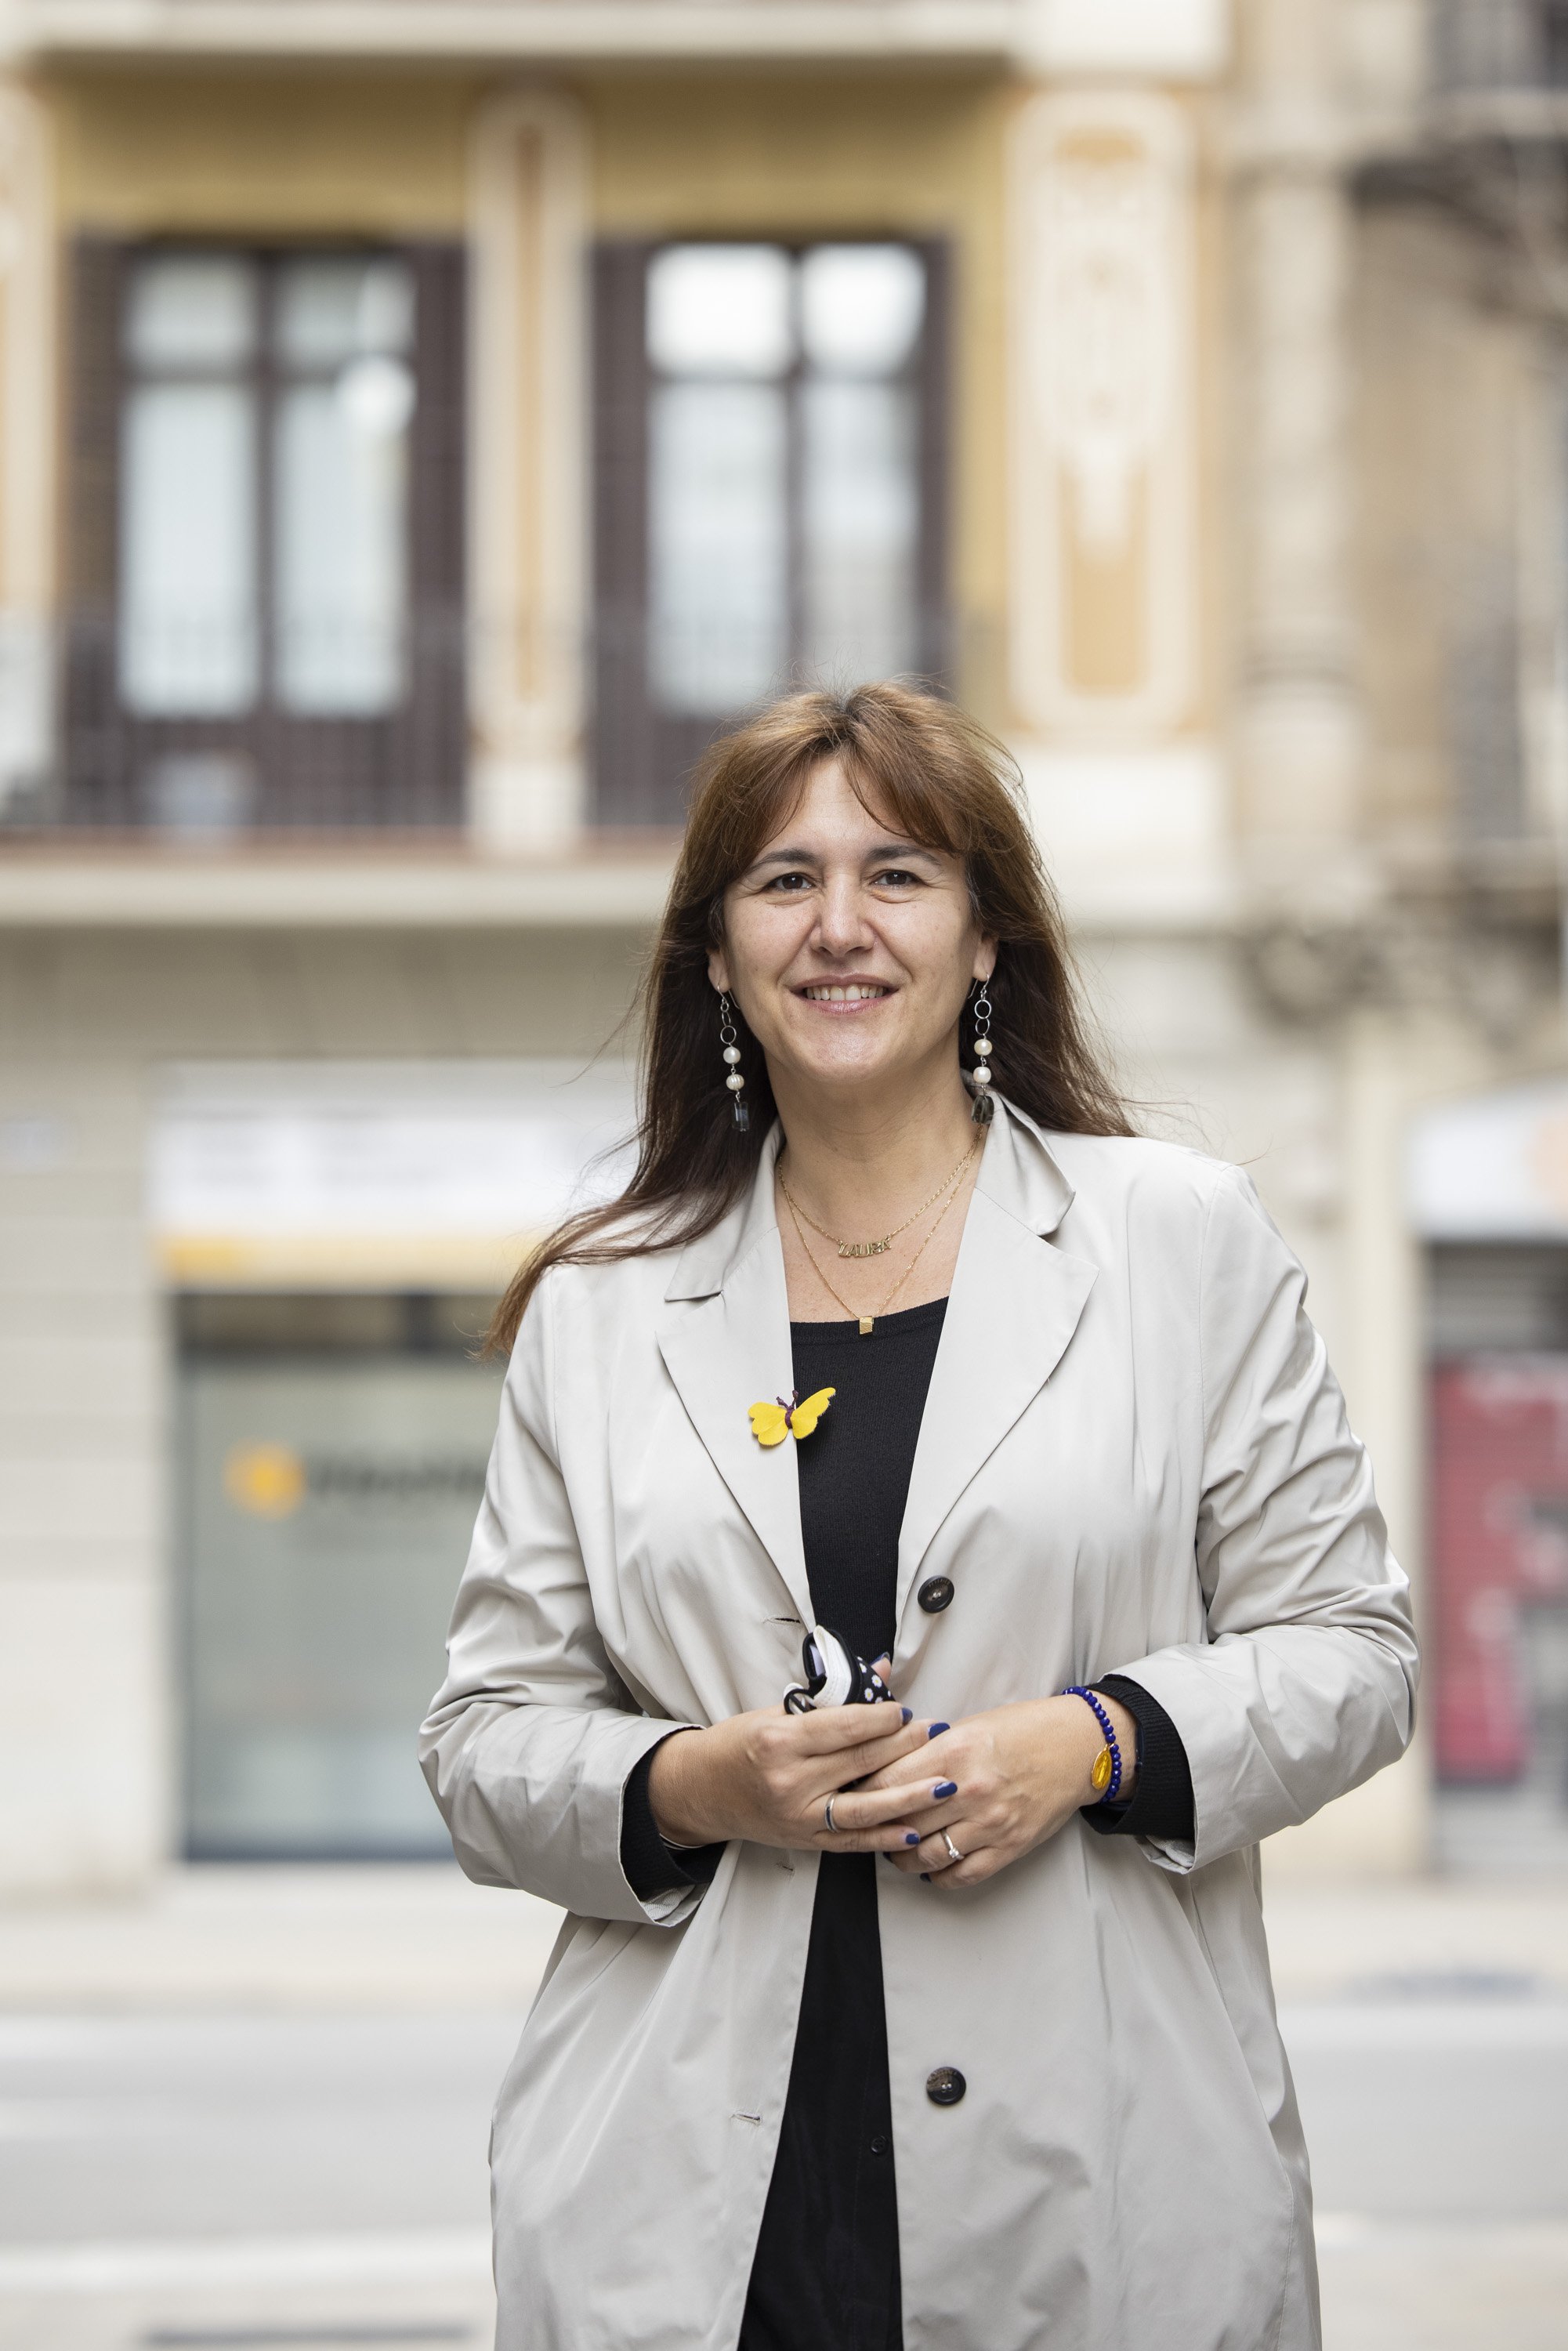 Laura Borràs will be speaker of the new Catalan Parliament